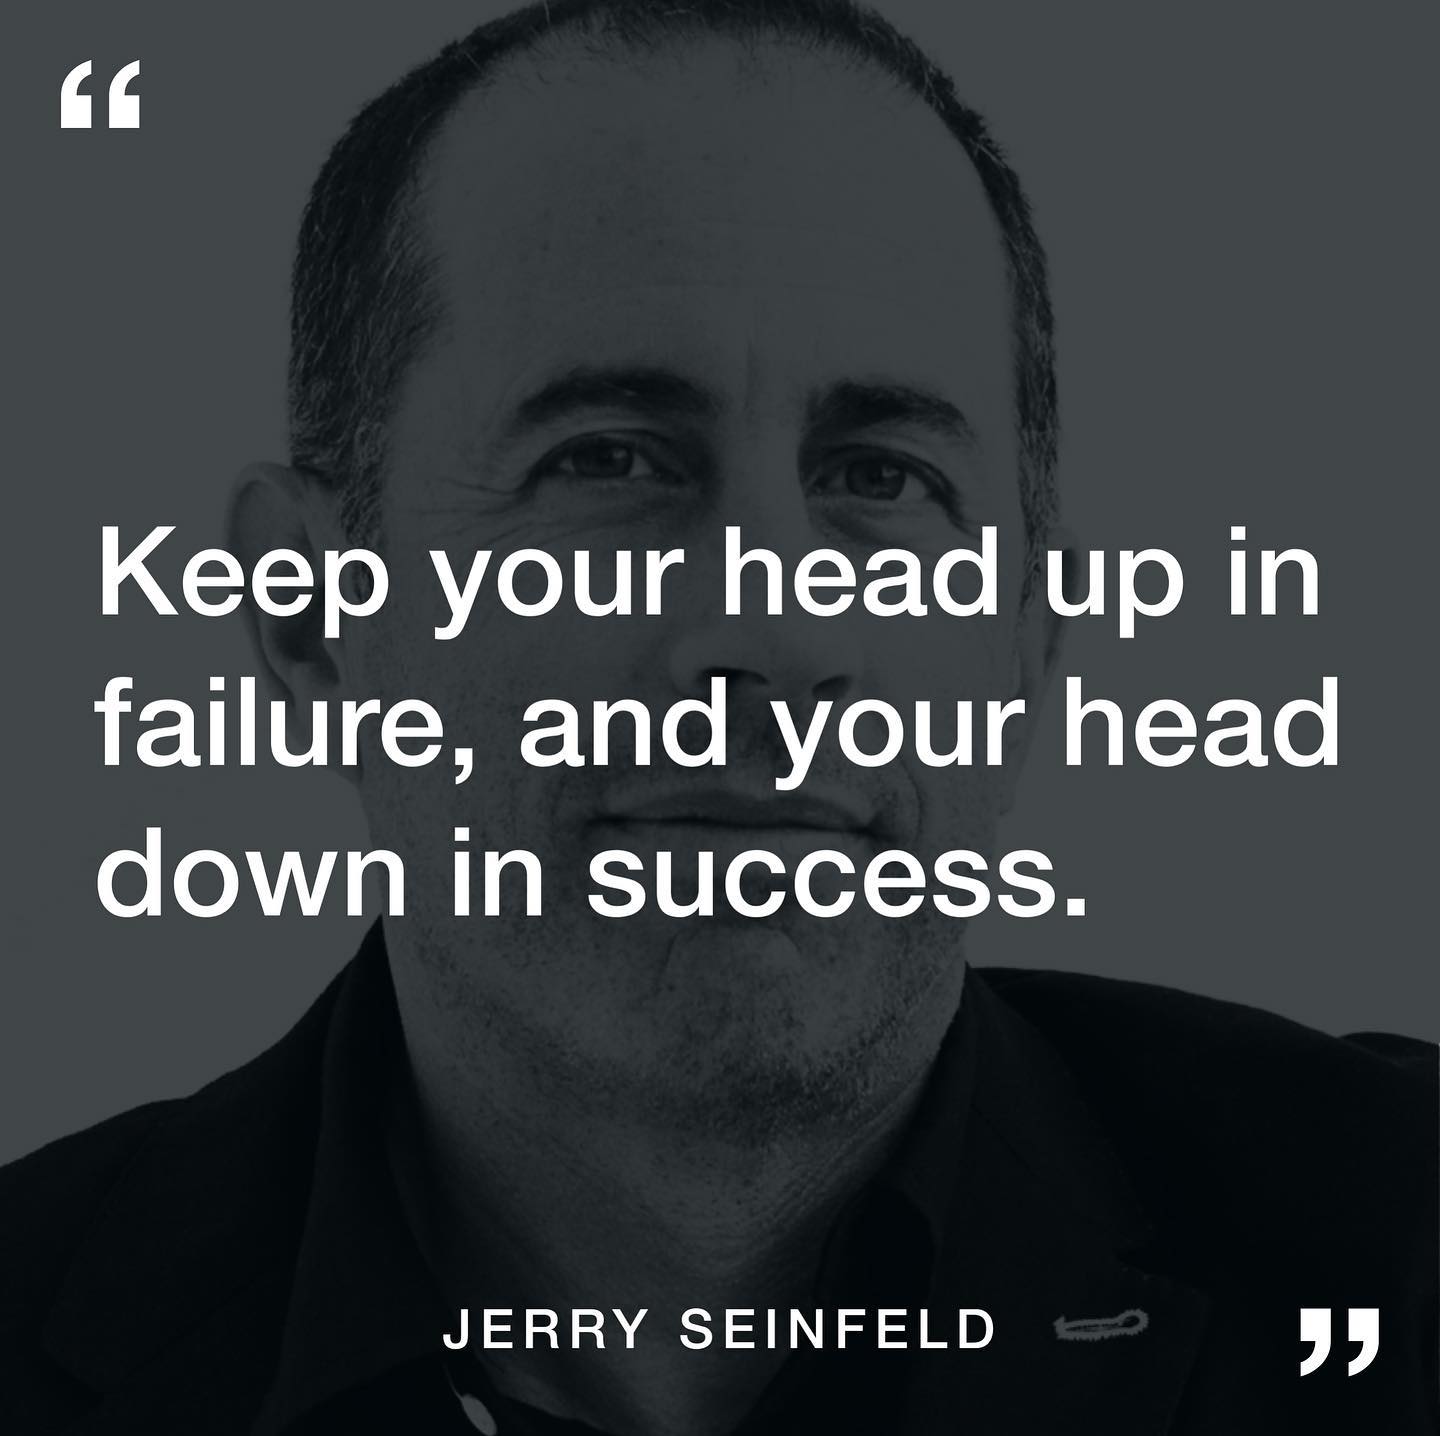 Keep your head up in failure and your head down in success.